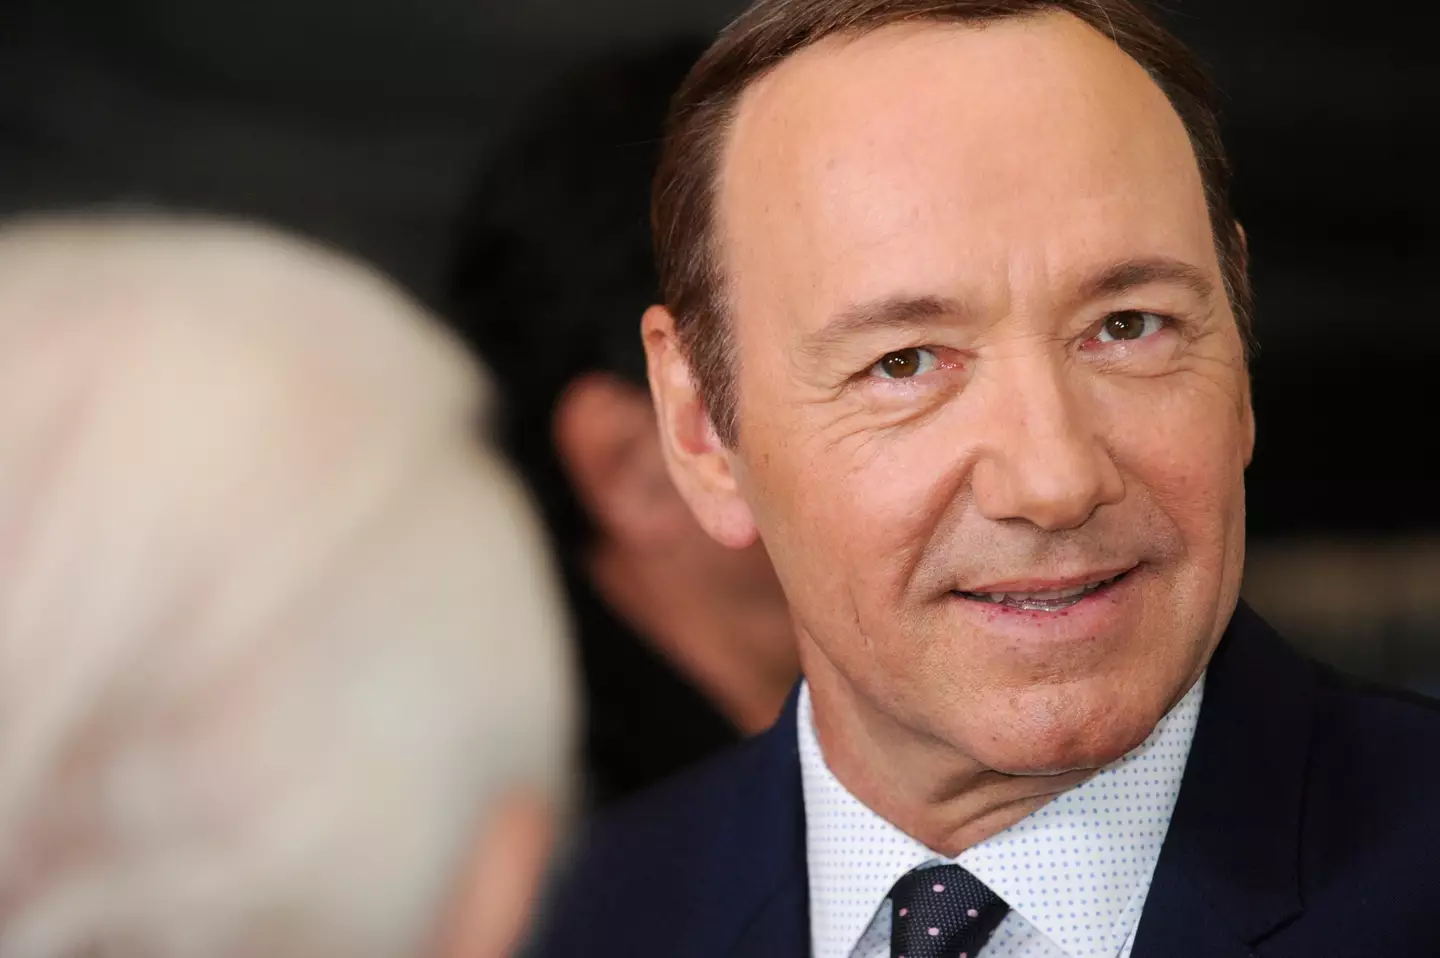 Spacey denies the incident ever happened.